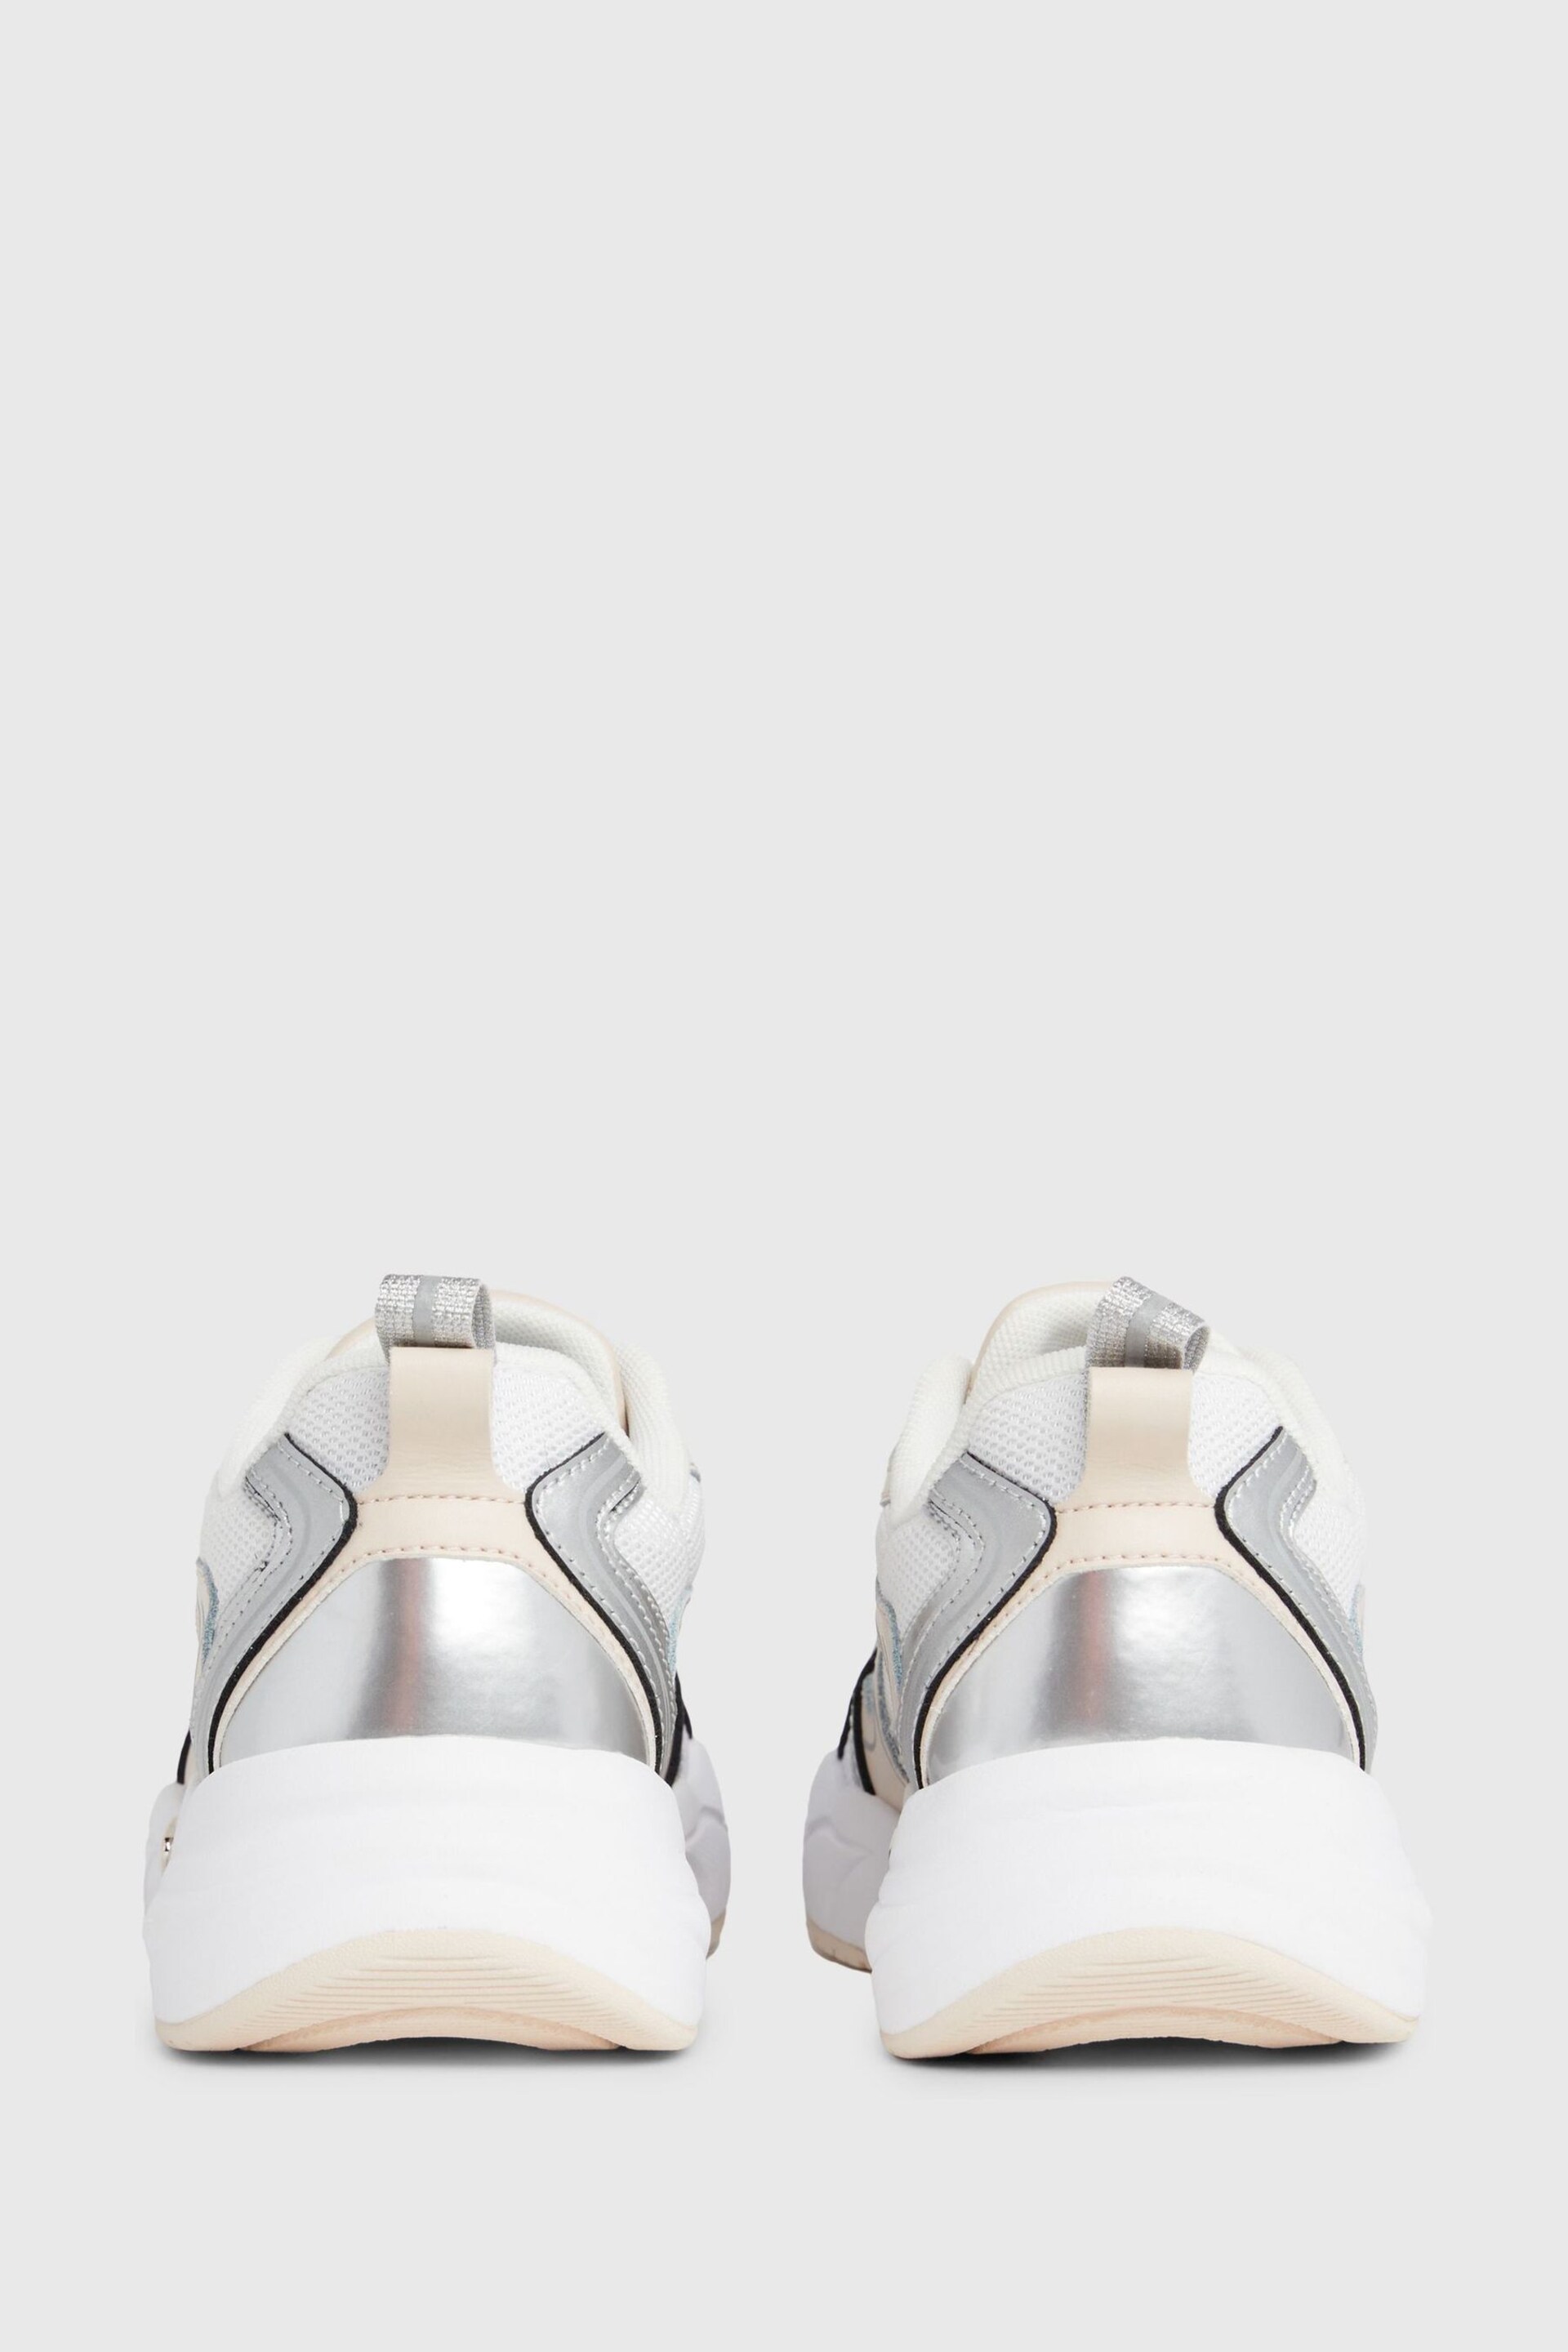 Calvin Klein White Retro Tennis Low Lace Trainers - Image 6 of 6